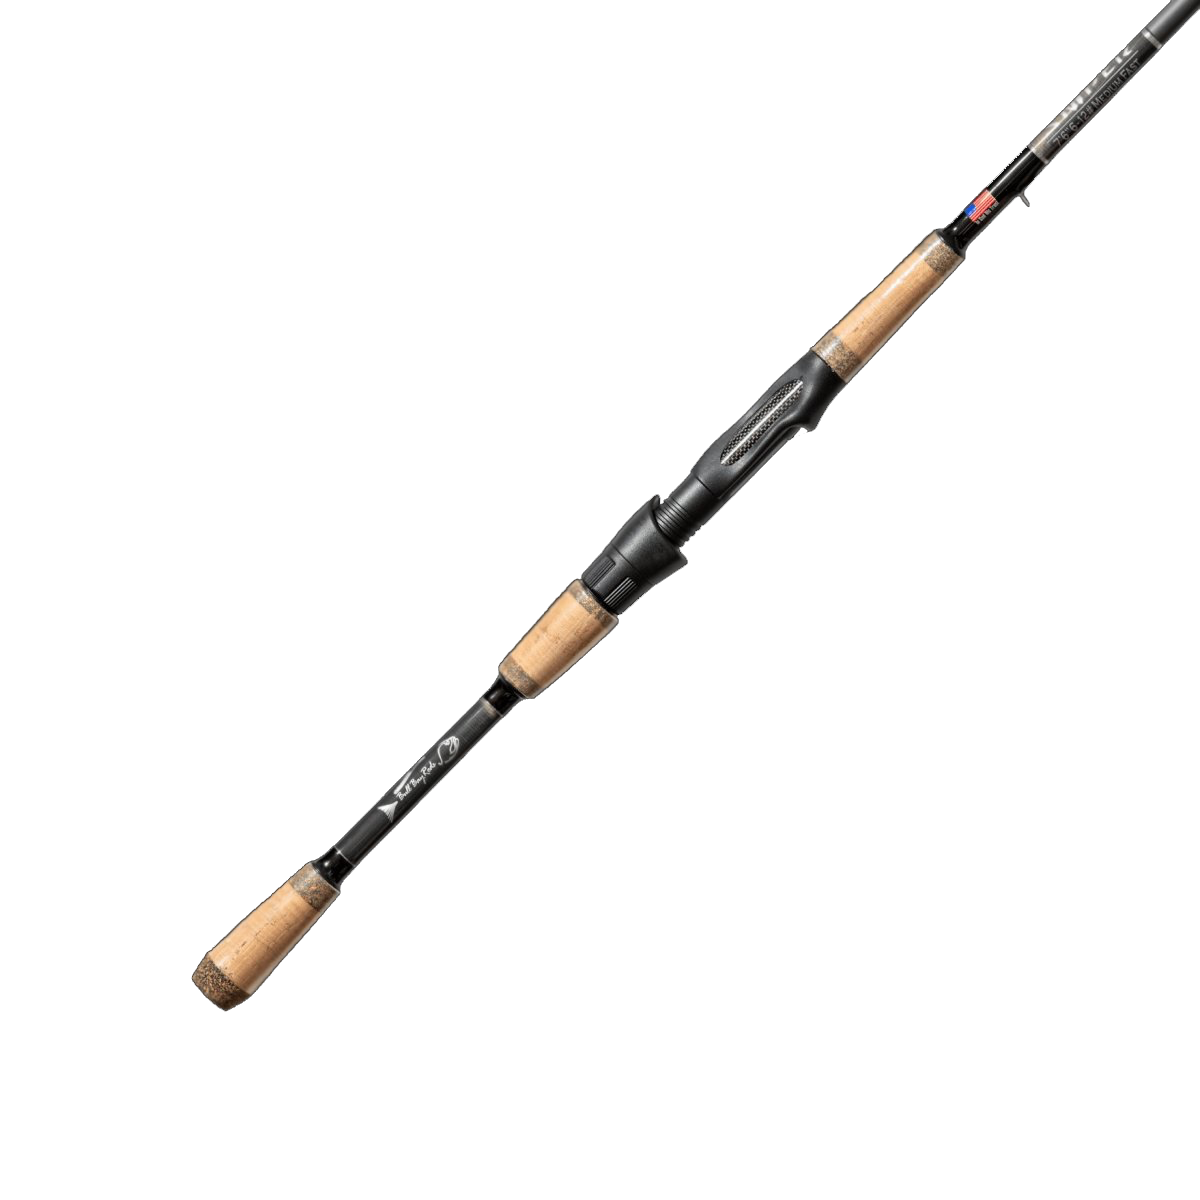 Bull Bay Rods – Florida Fishing Products